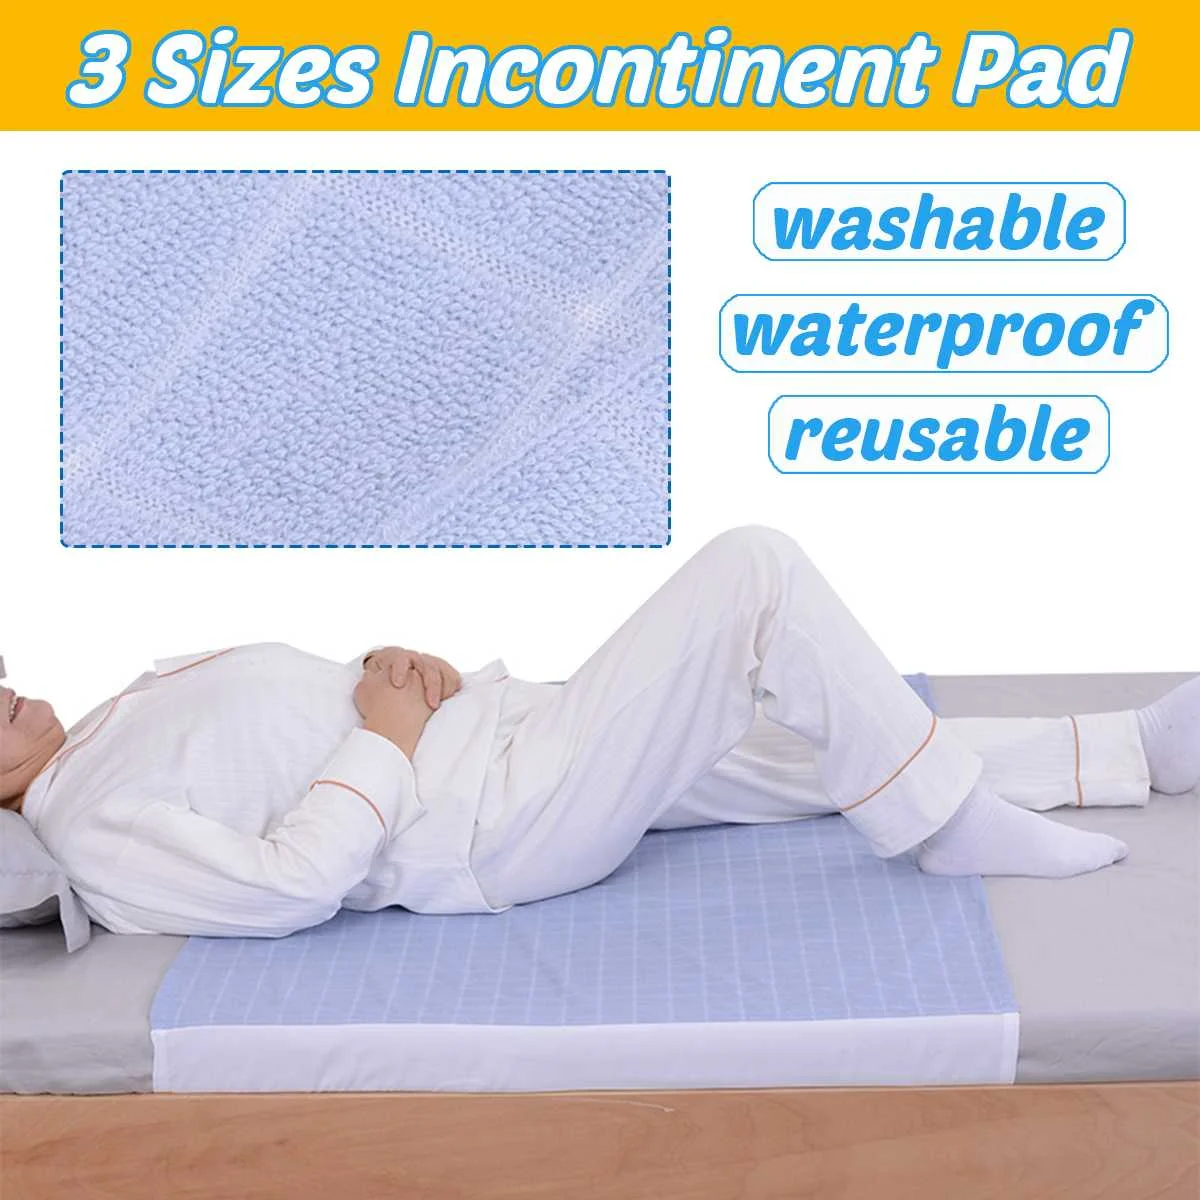 

Waterproof Urine Mat Cotton Washable Reusable Mattress Diaper Changing Cover Pad For Kids Adult Elderly Incontinence